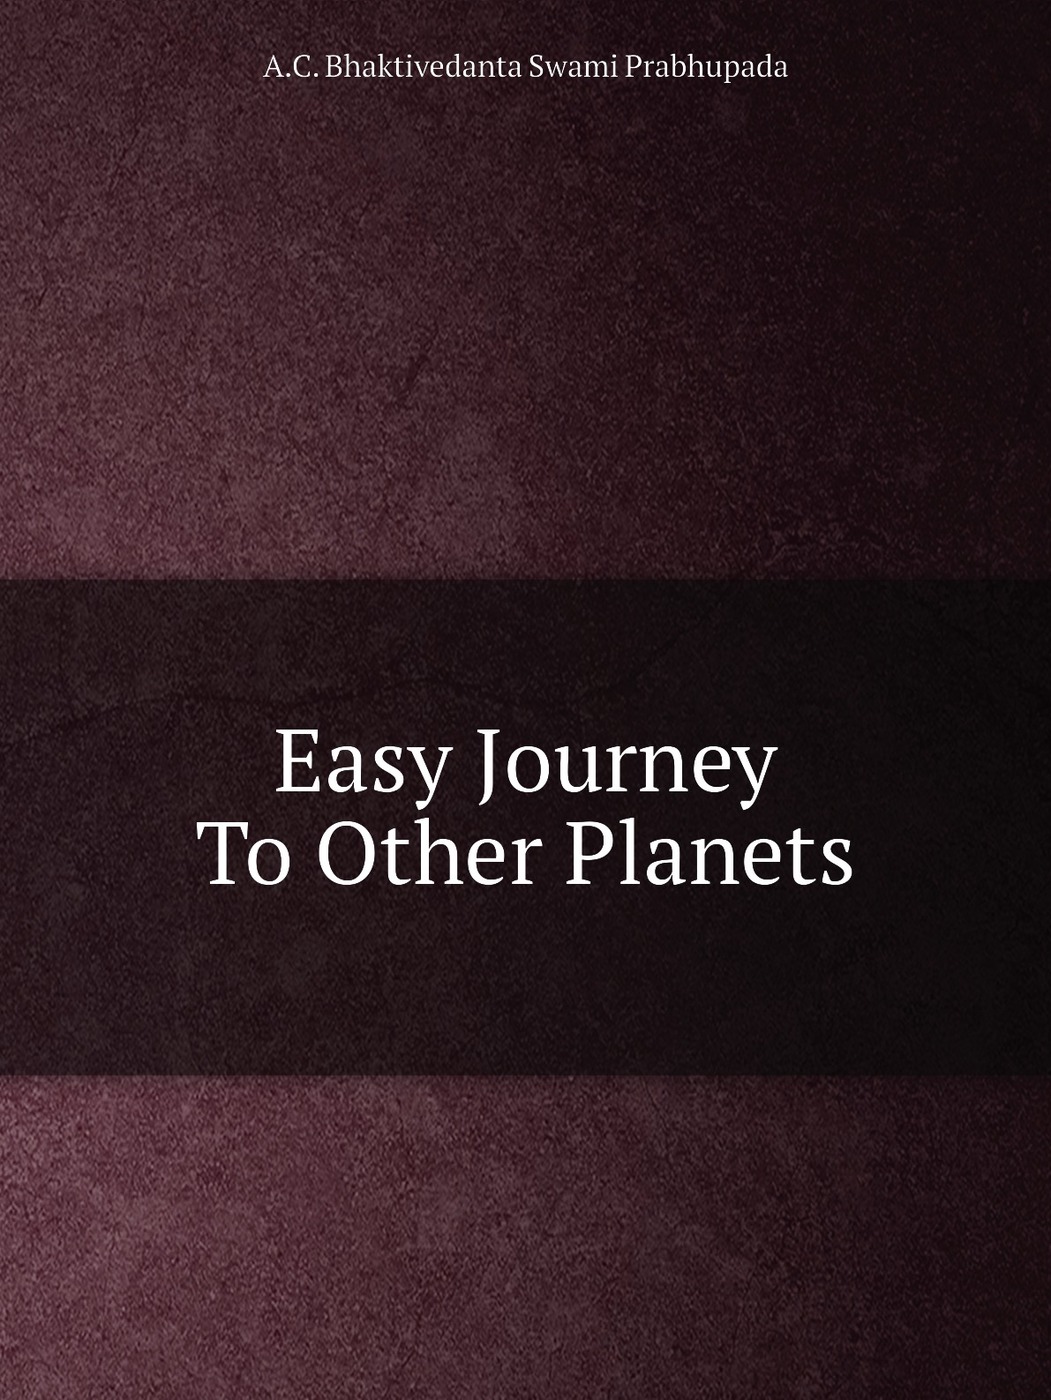 easy journey to other planets in hindi pdf